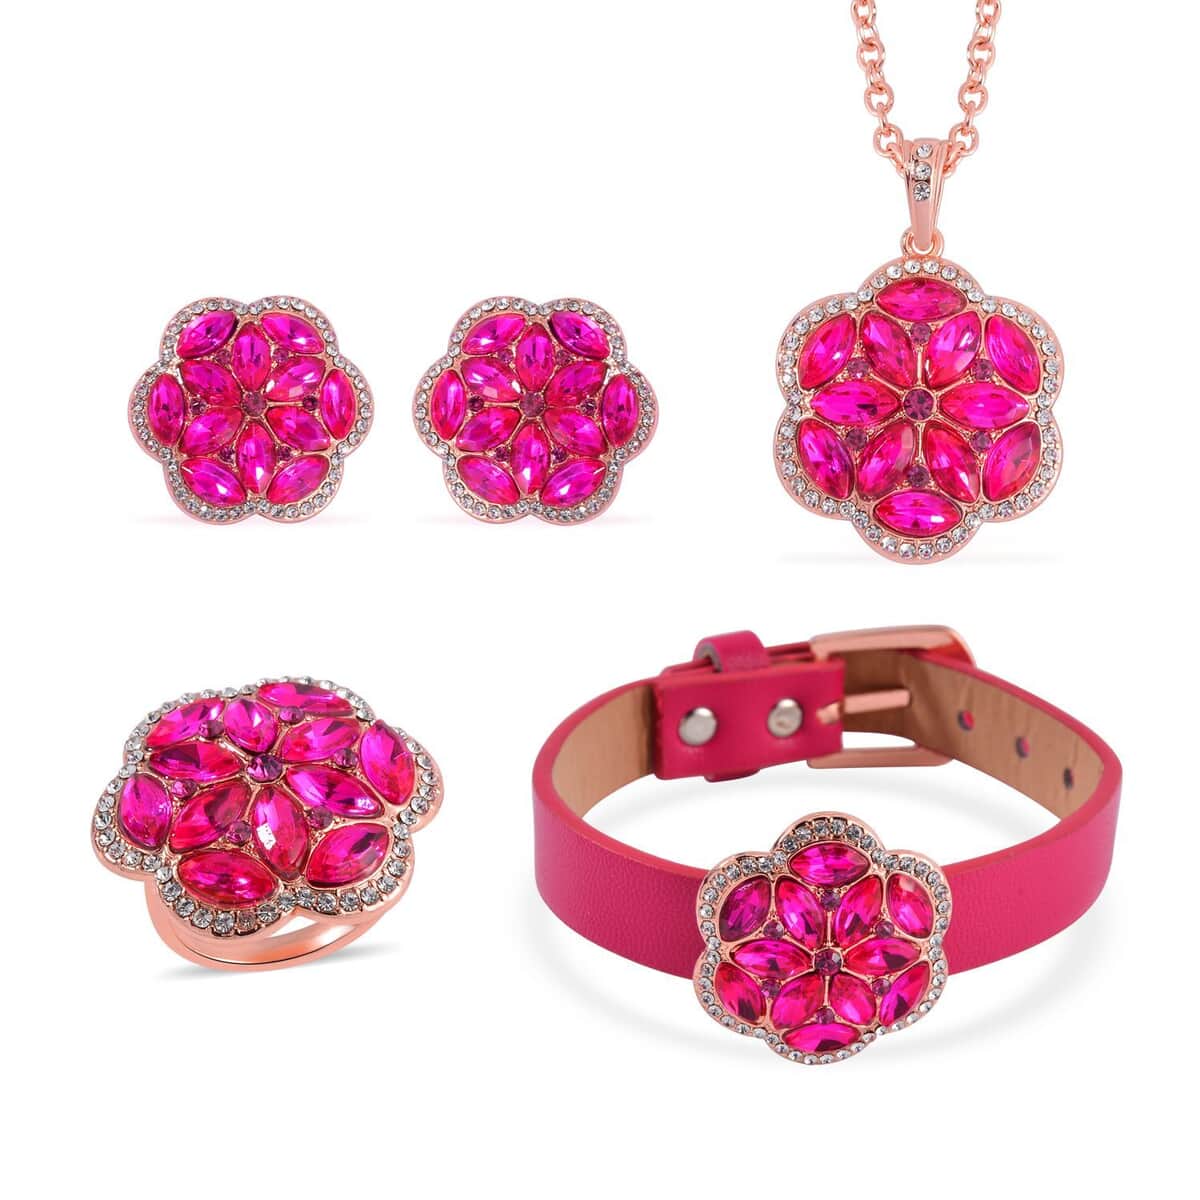 Fuchsia and White Austrian Crystal, Faux Leather Floral Bracelet (6-8In), Earrings, Ring (Size 8.0) and Pendant Necklace 20-22 Inches In Rosetone image number 0